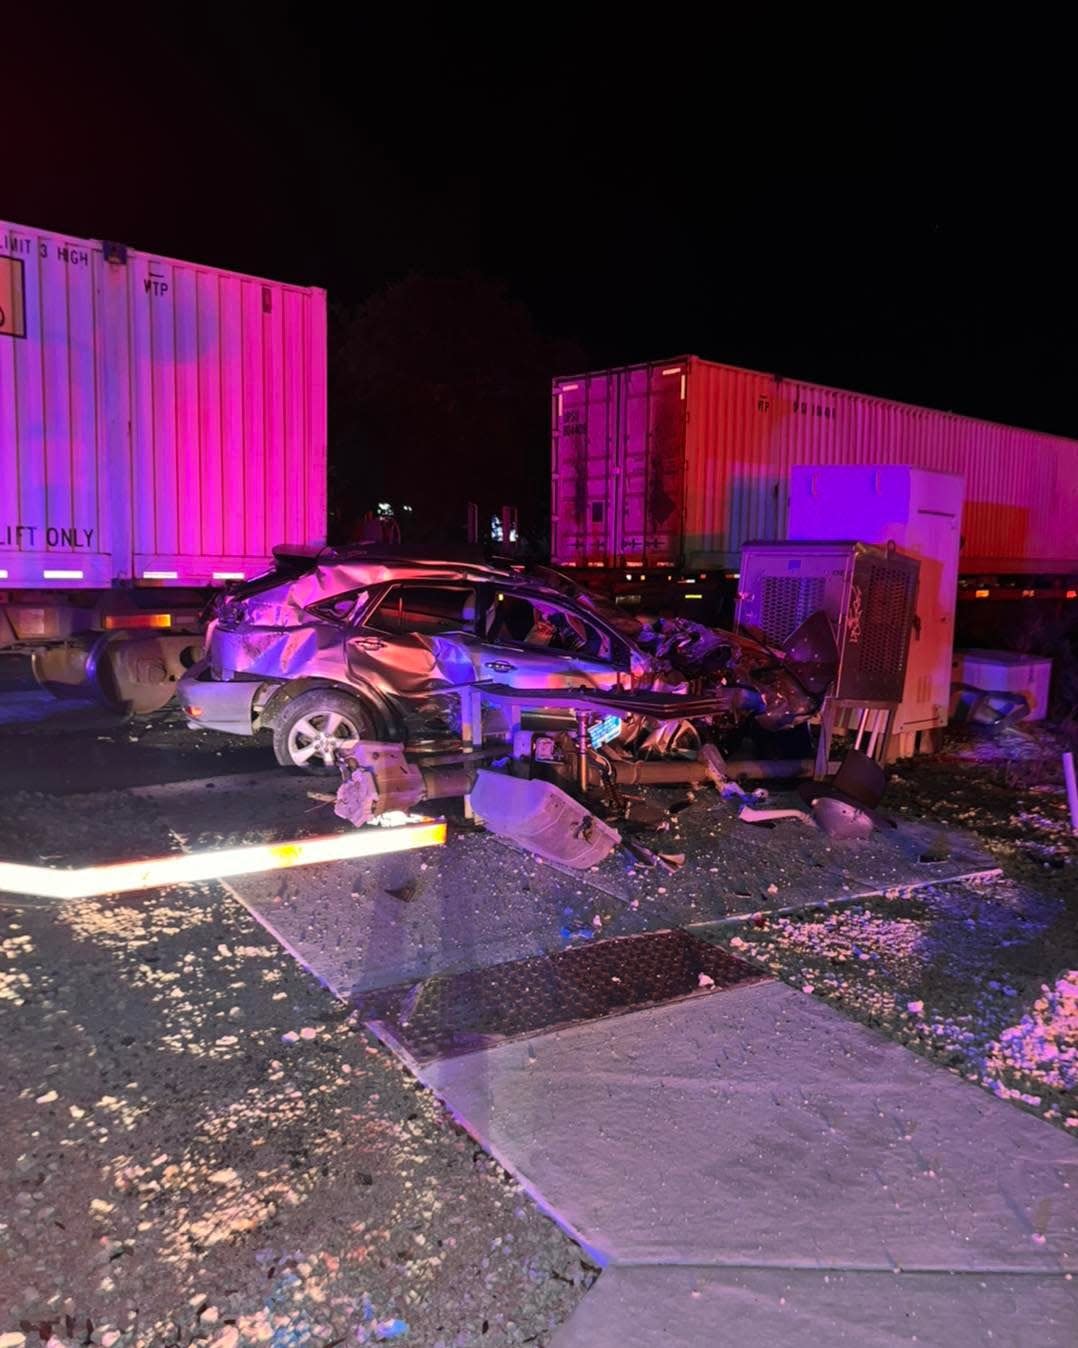 A train struck a vehicle that was stuck in gravel in the early morning of Sunday, September 4, 2022, according to the Indian River County Sheriff's Office.